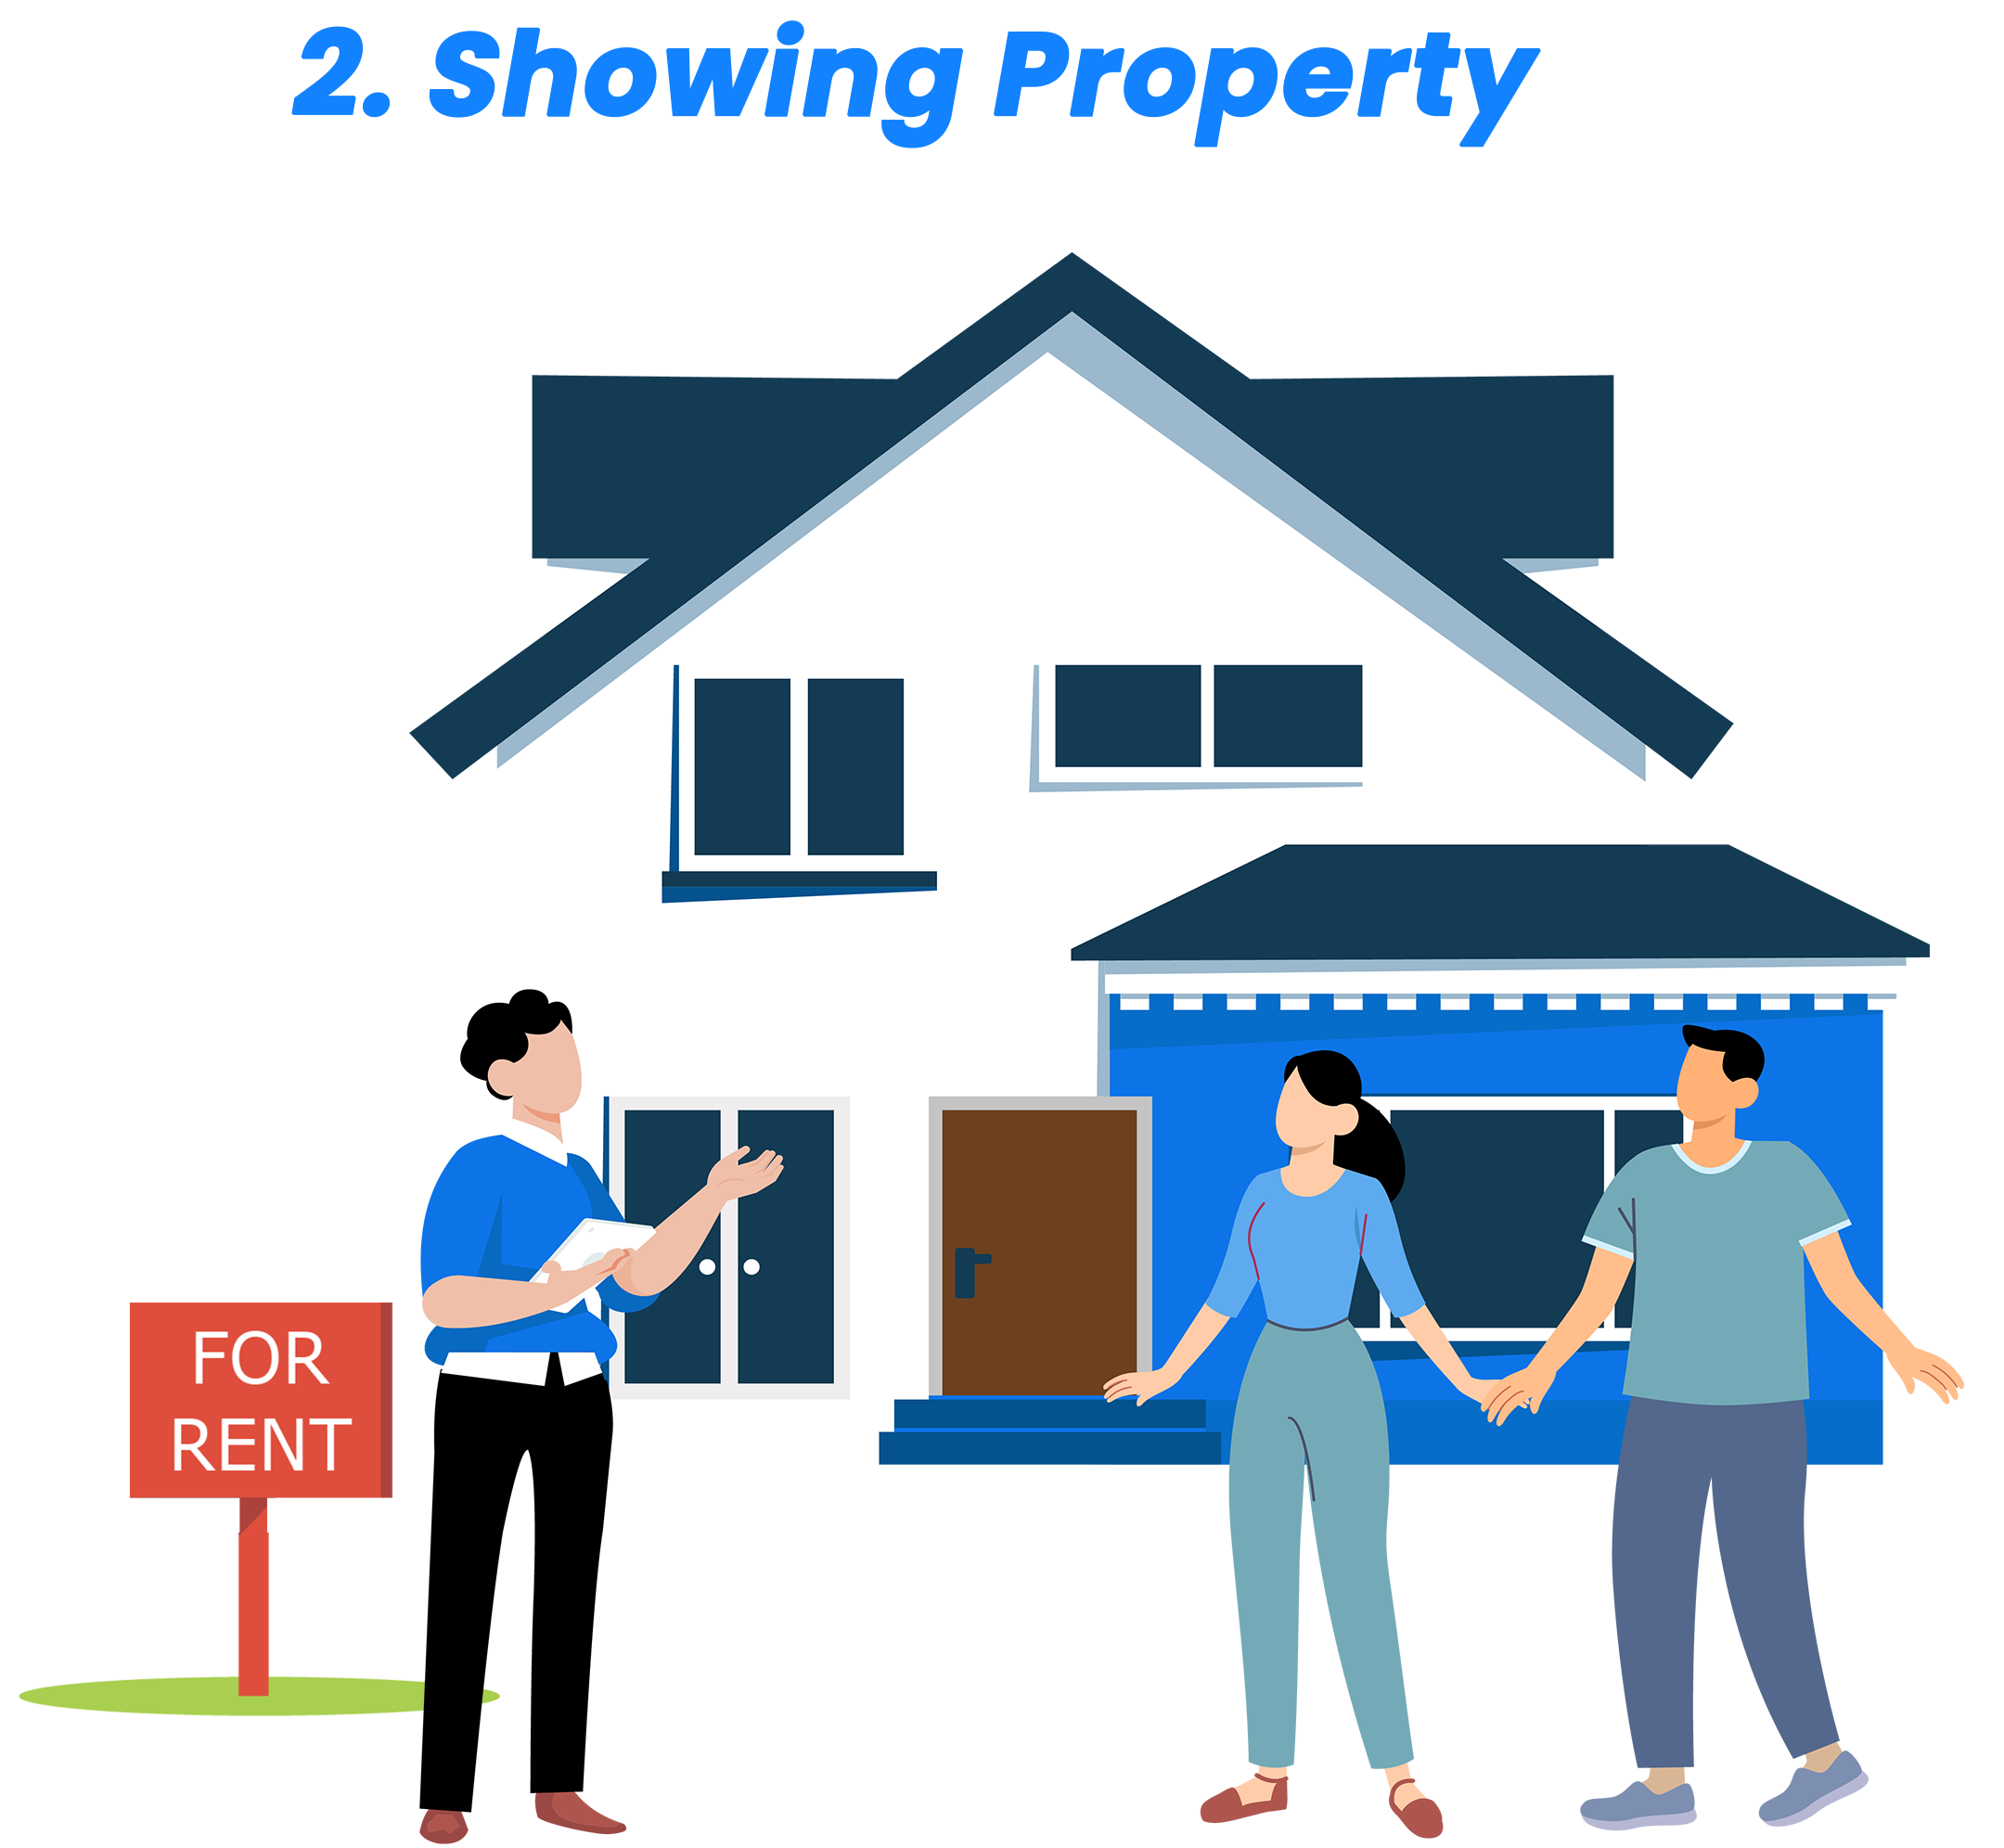 Step 2. Showing Property